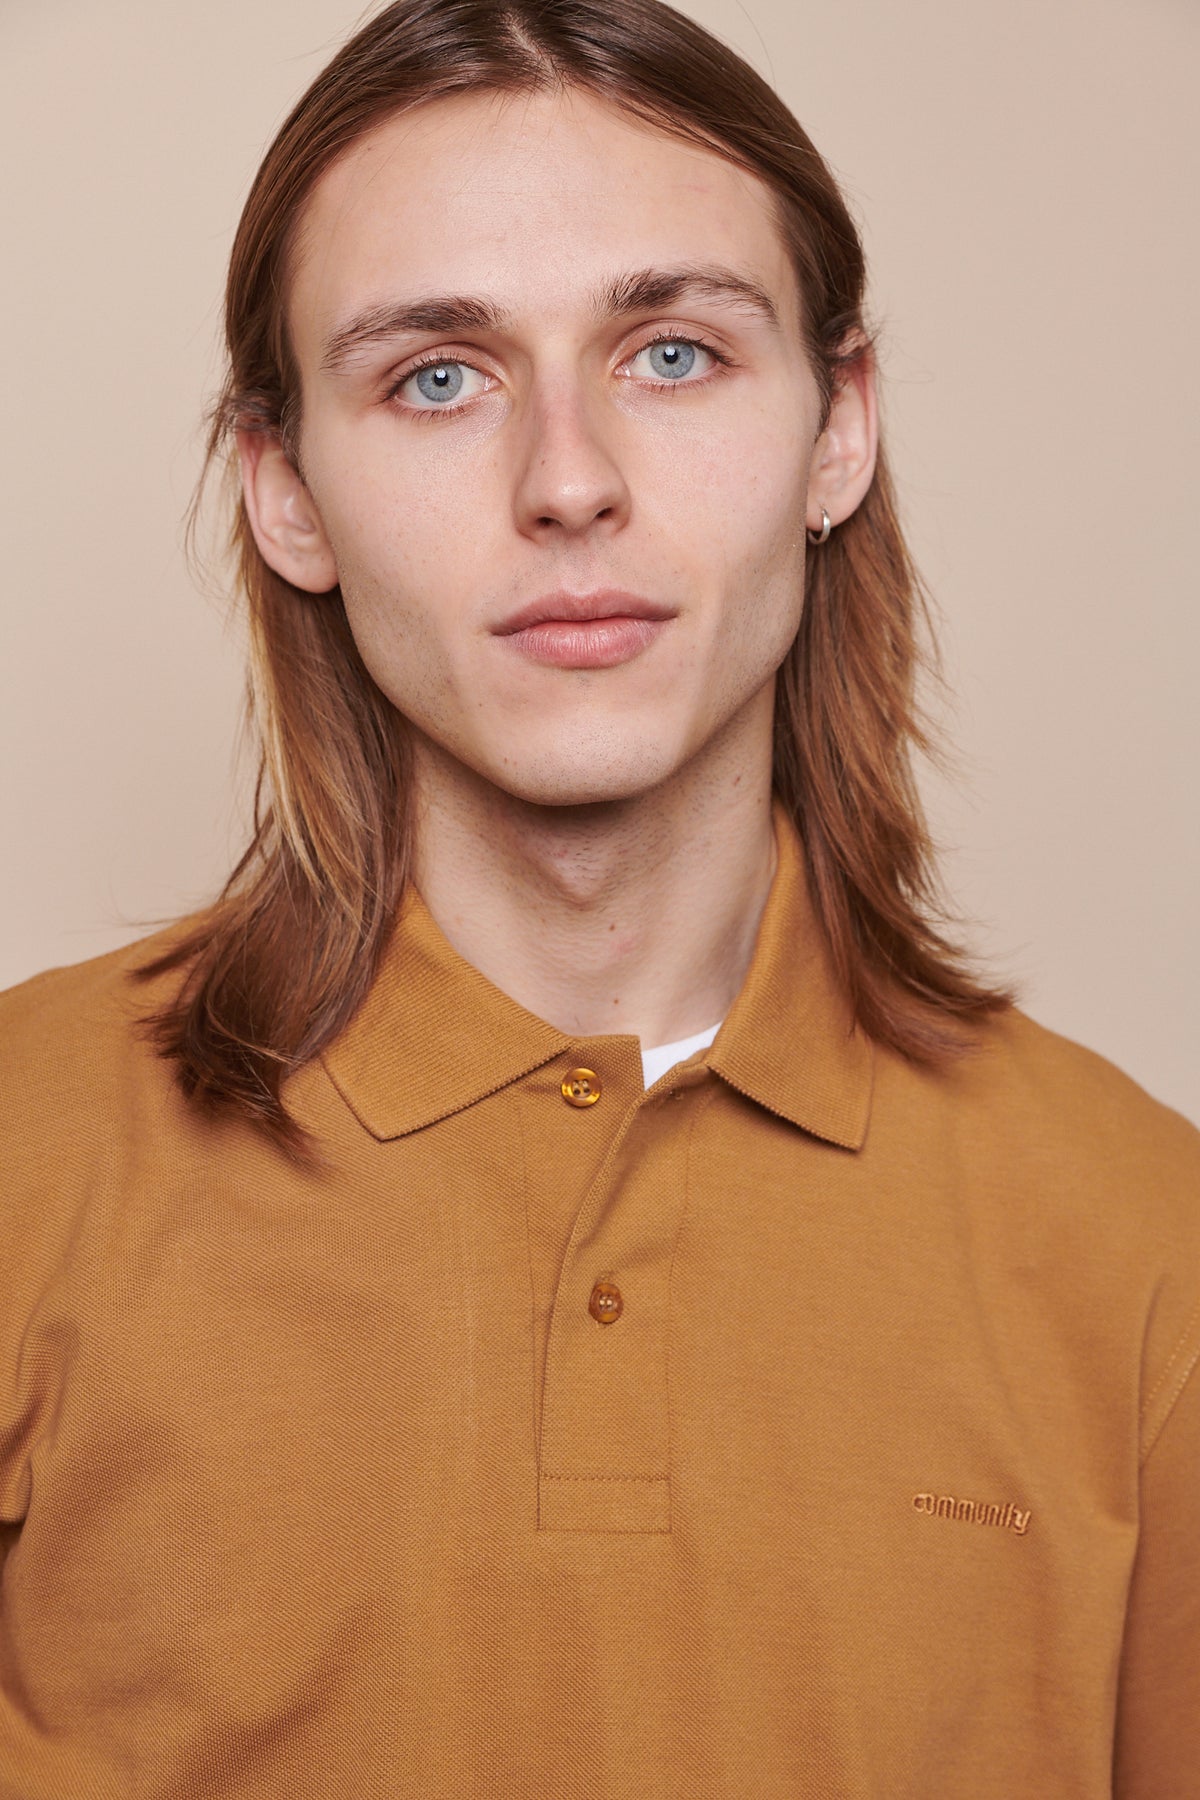 
            Portrait of male wearing short sleeve polo shirt in tan with top button undone showing crew neck white t shirt underneath